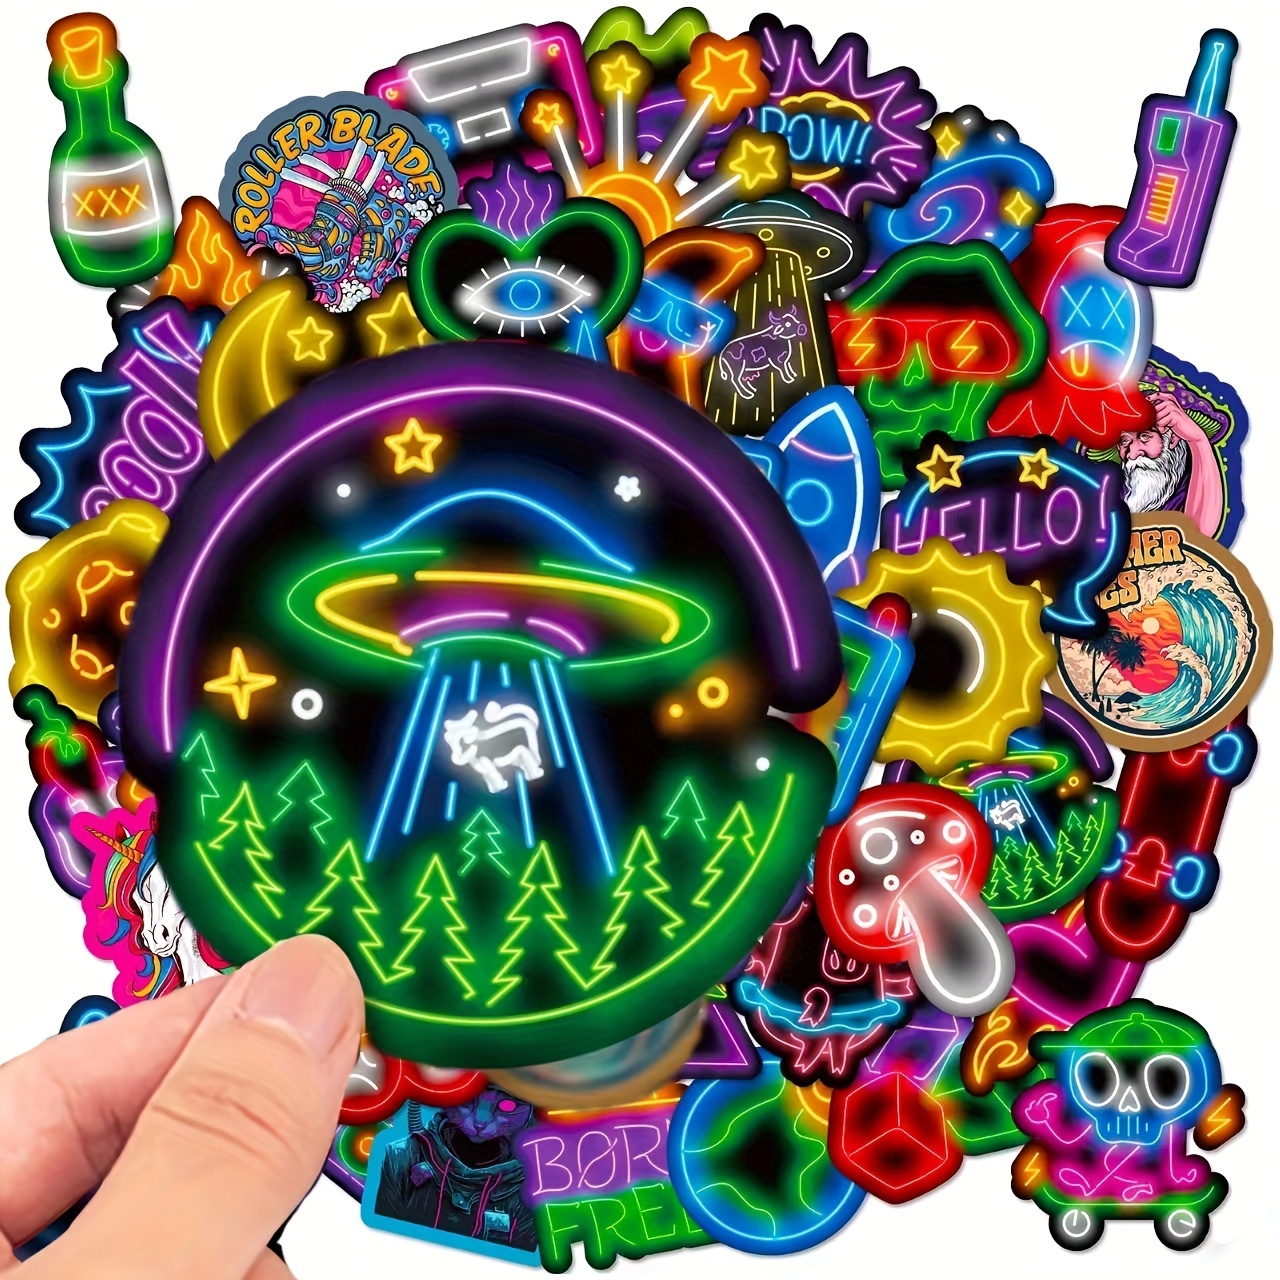 Glow in The Dark Neon Stickers for Kids Teens Adults Glowing Stickers for Water Bottles Scrapbooking Party Supplies Favors Home Decor Waterproof